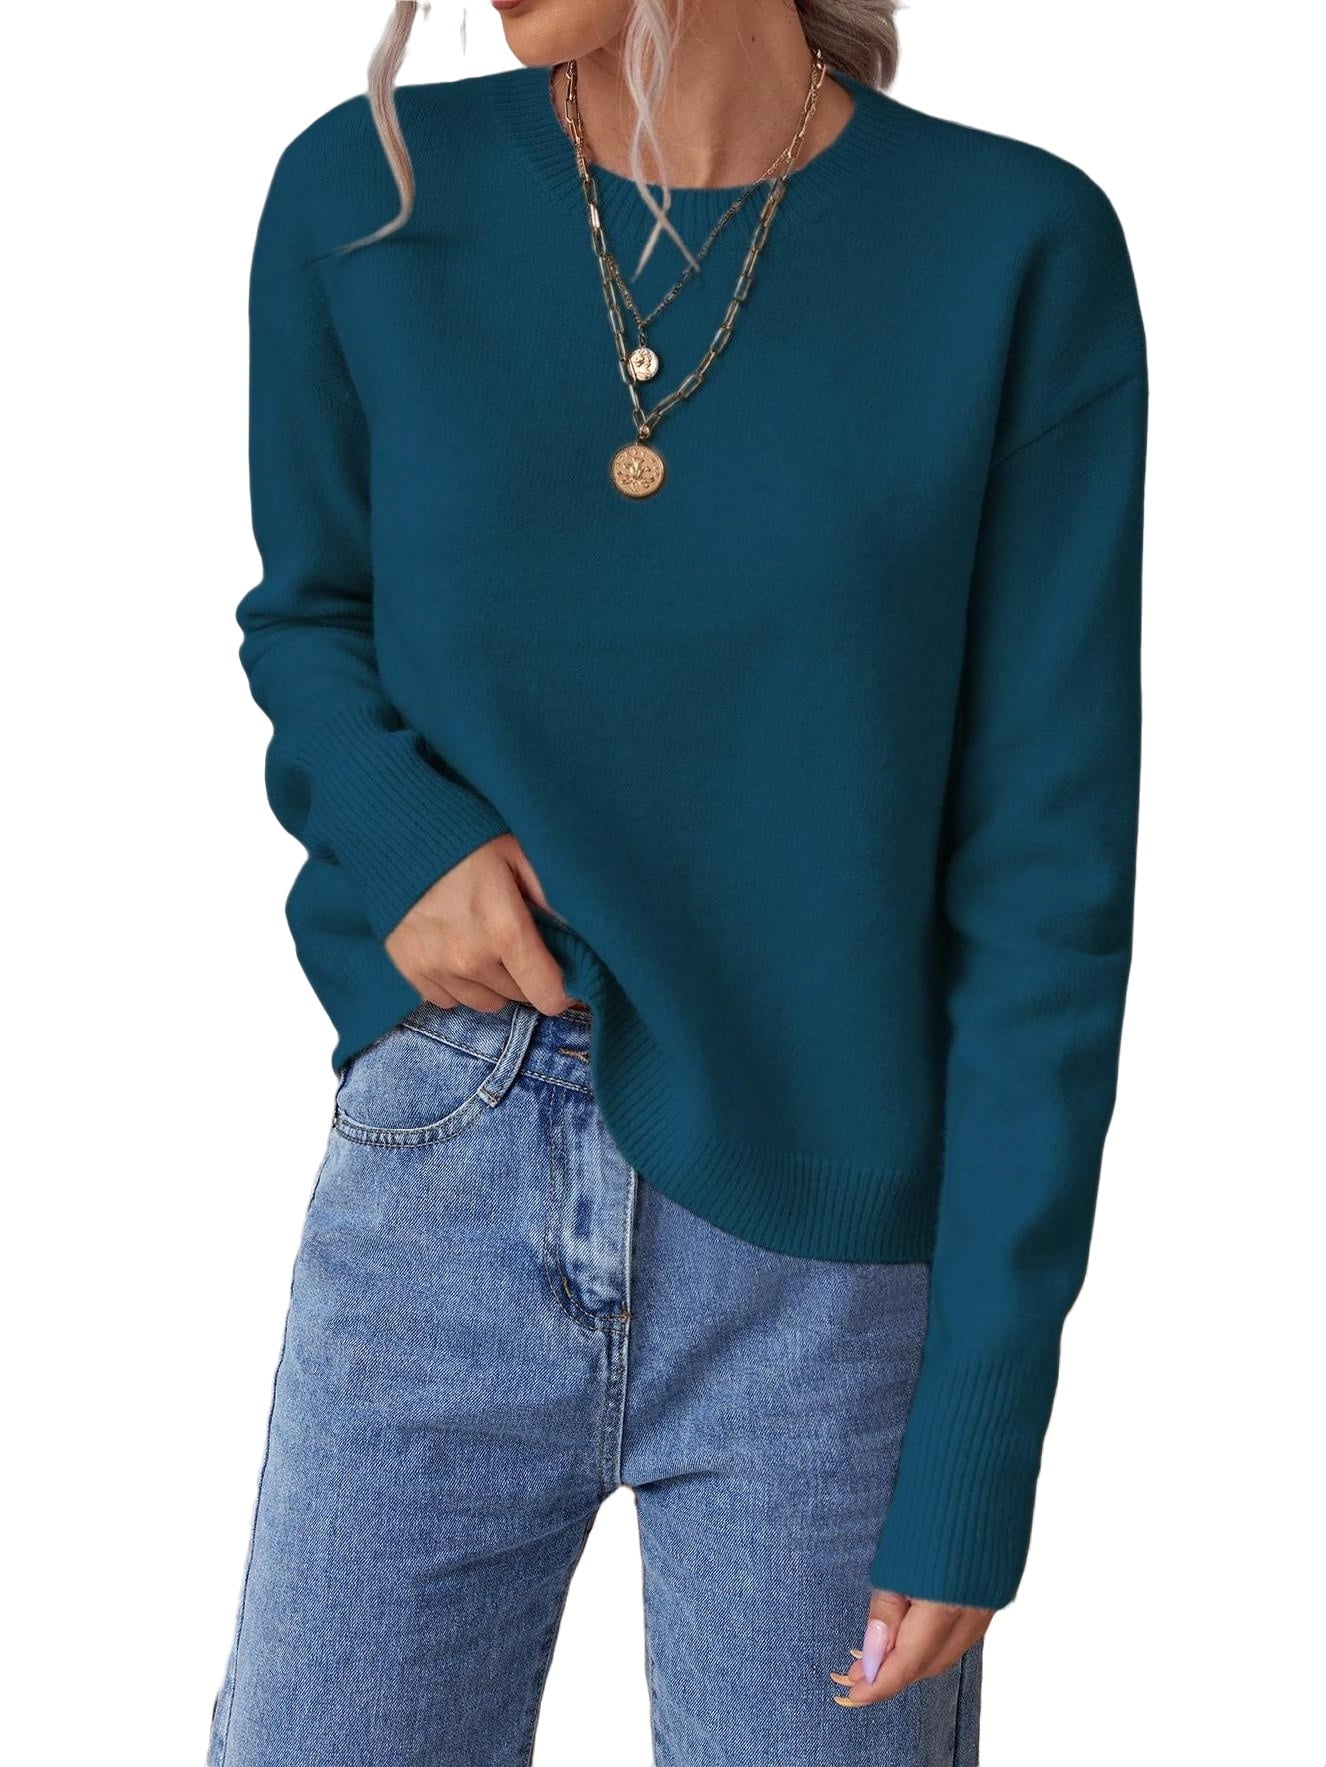 Casual Solid Round Neck Pullovers Long Sleeve Teal Blue Women's Sweaters  (Women's)